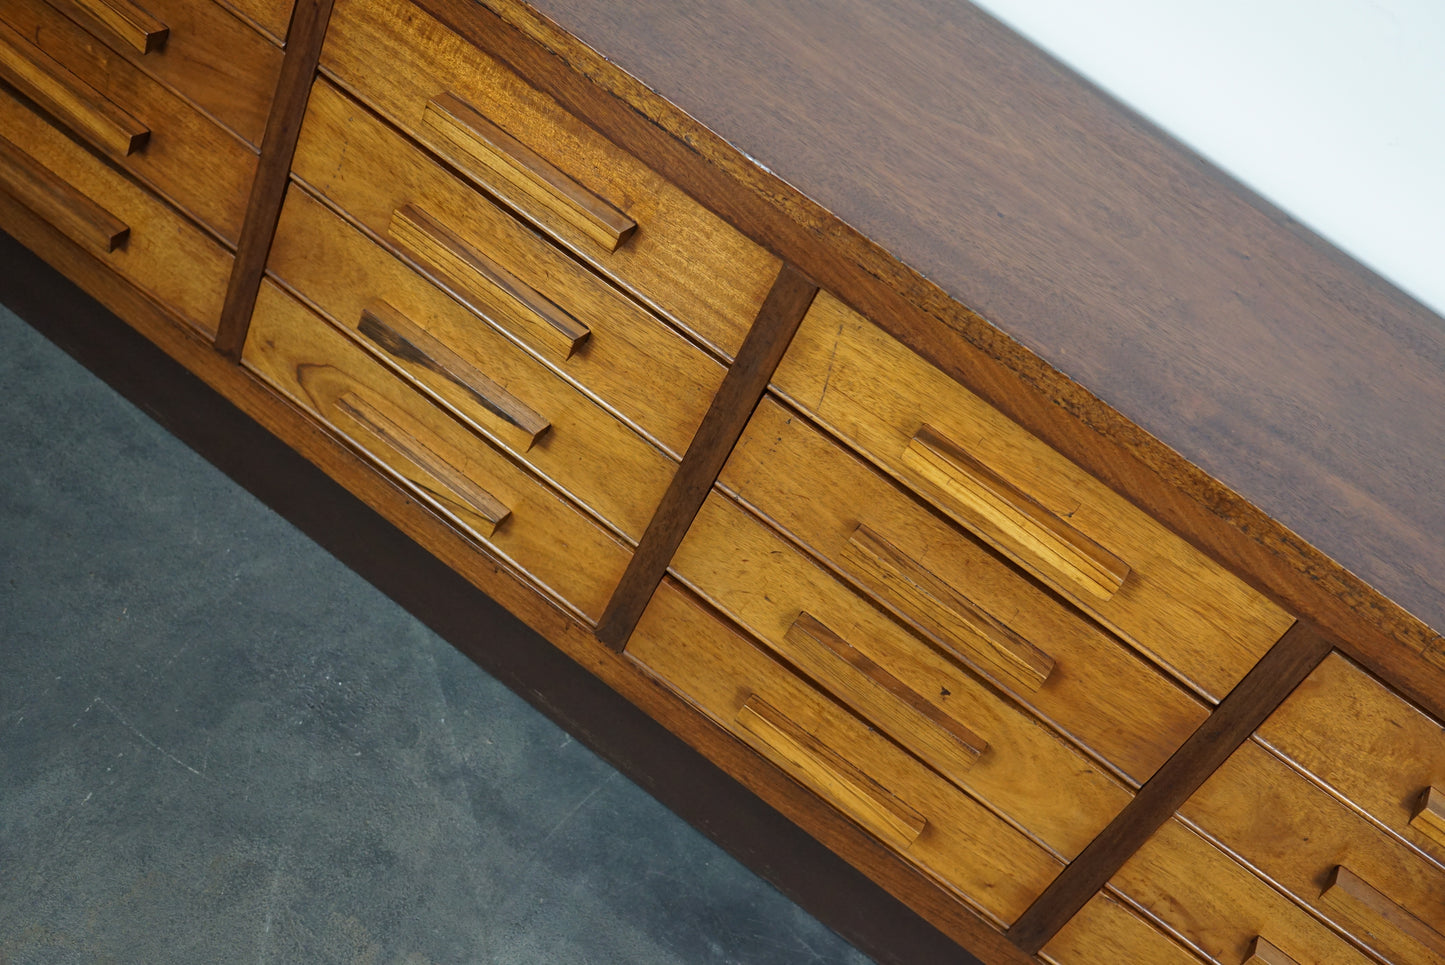 German Industrial Walnut Apothecary Cabinet / Lowboard, Mid-20th Century